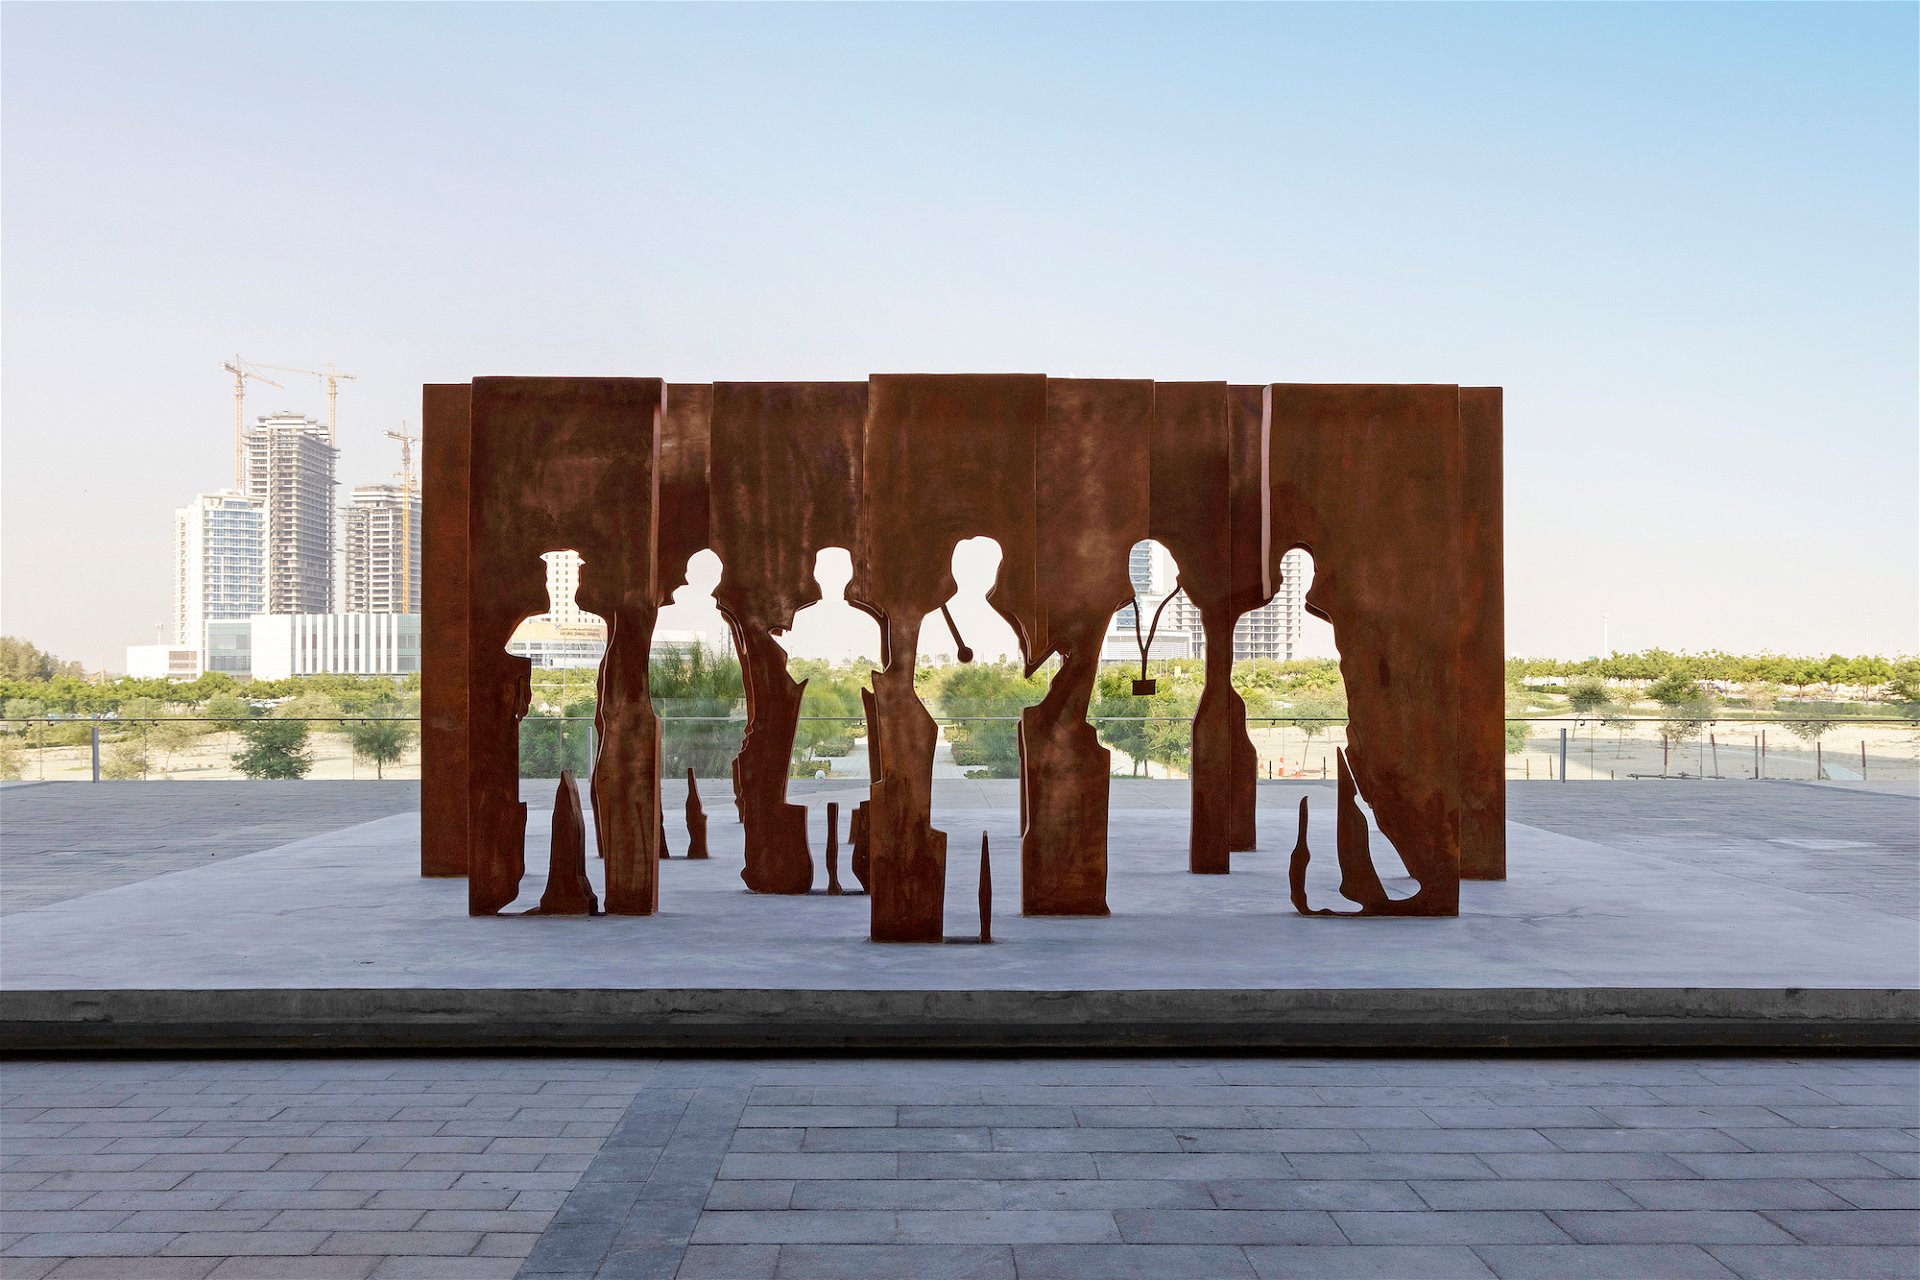 Dubai Science Park and Kart Group Celebrate Frontline Heroes with Unique Art Installation